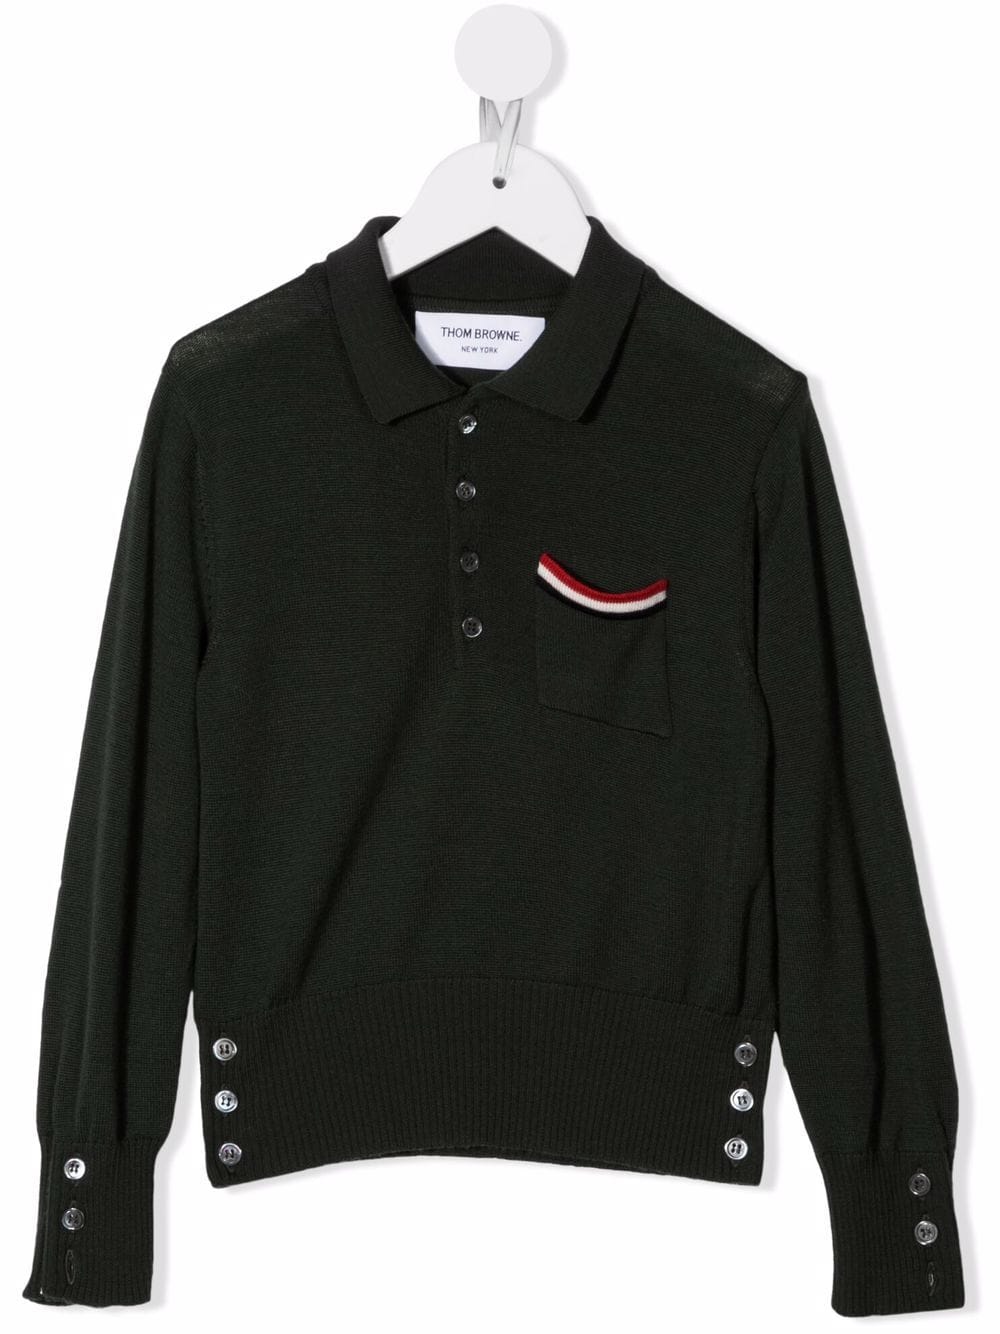 Thom Browne Kids long-sleeve knitted polo top - Green von Thom Browne Kids